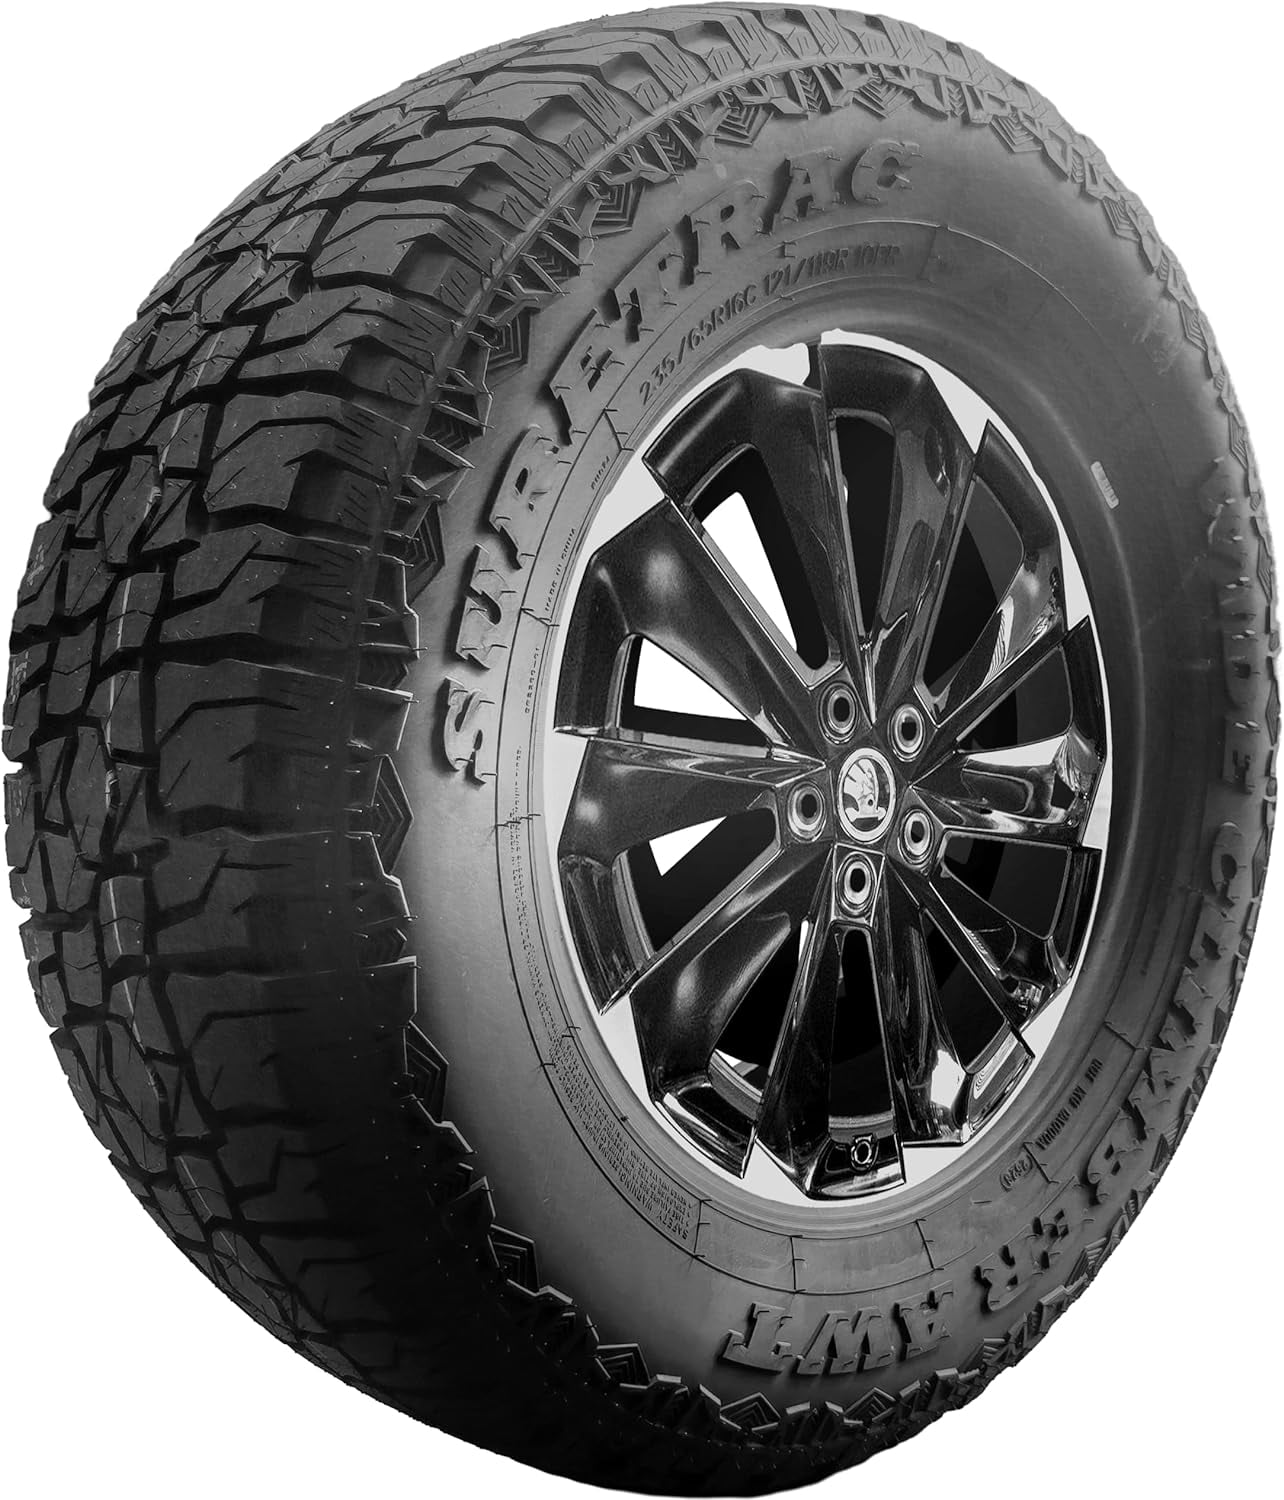 Traction Terrain All LT35X12.50R20 All OWL Suretrac truck Weather Climber F/12 AWT tire Wide light road 125Q off